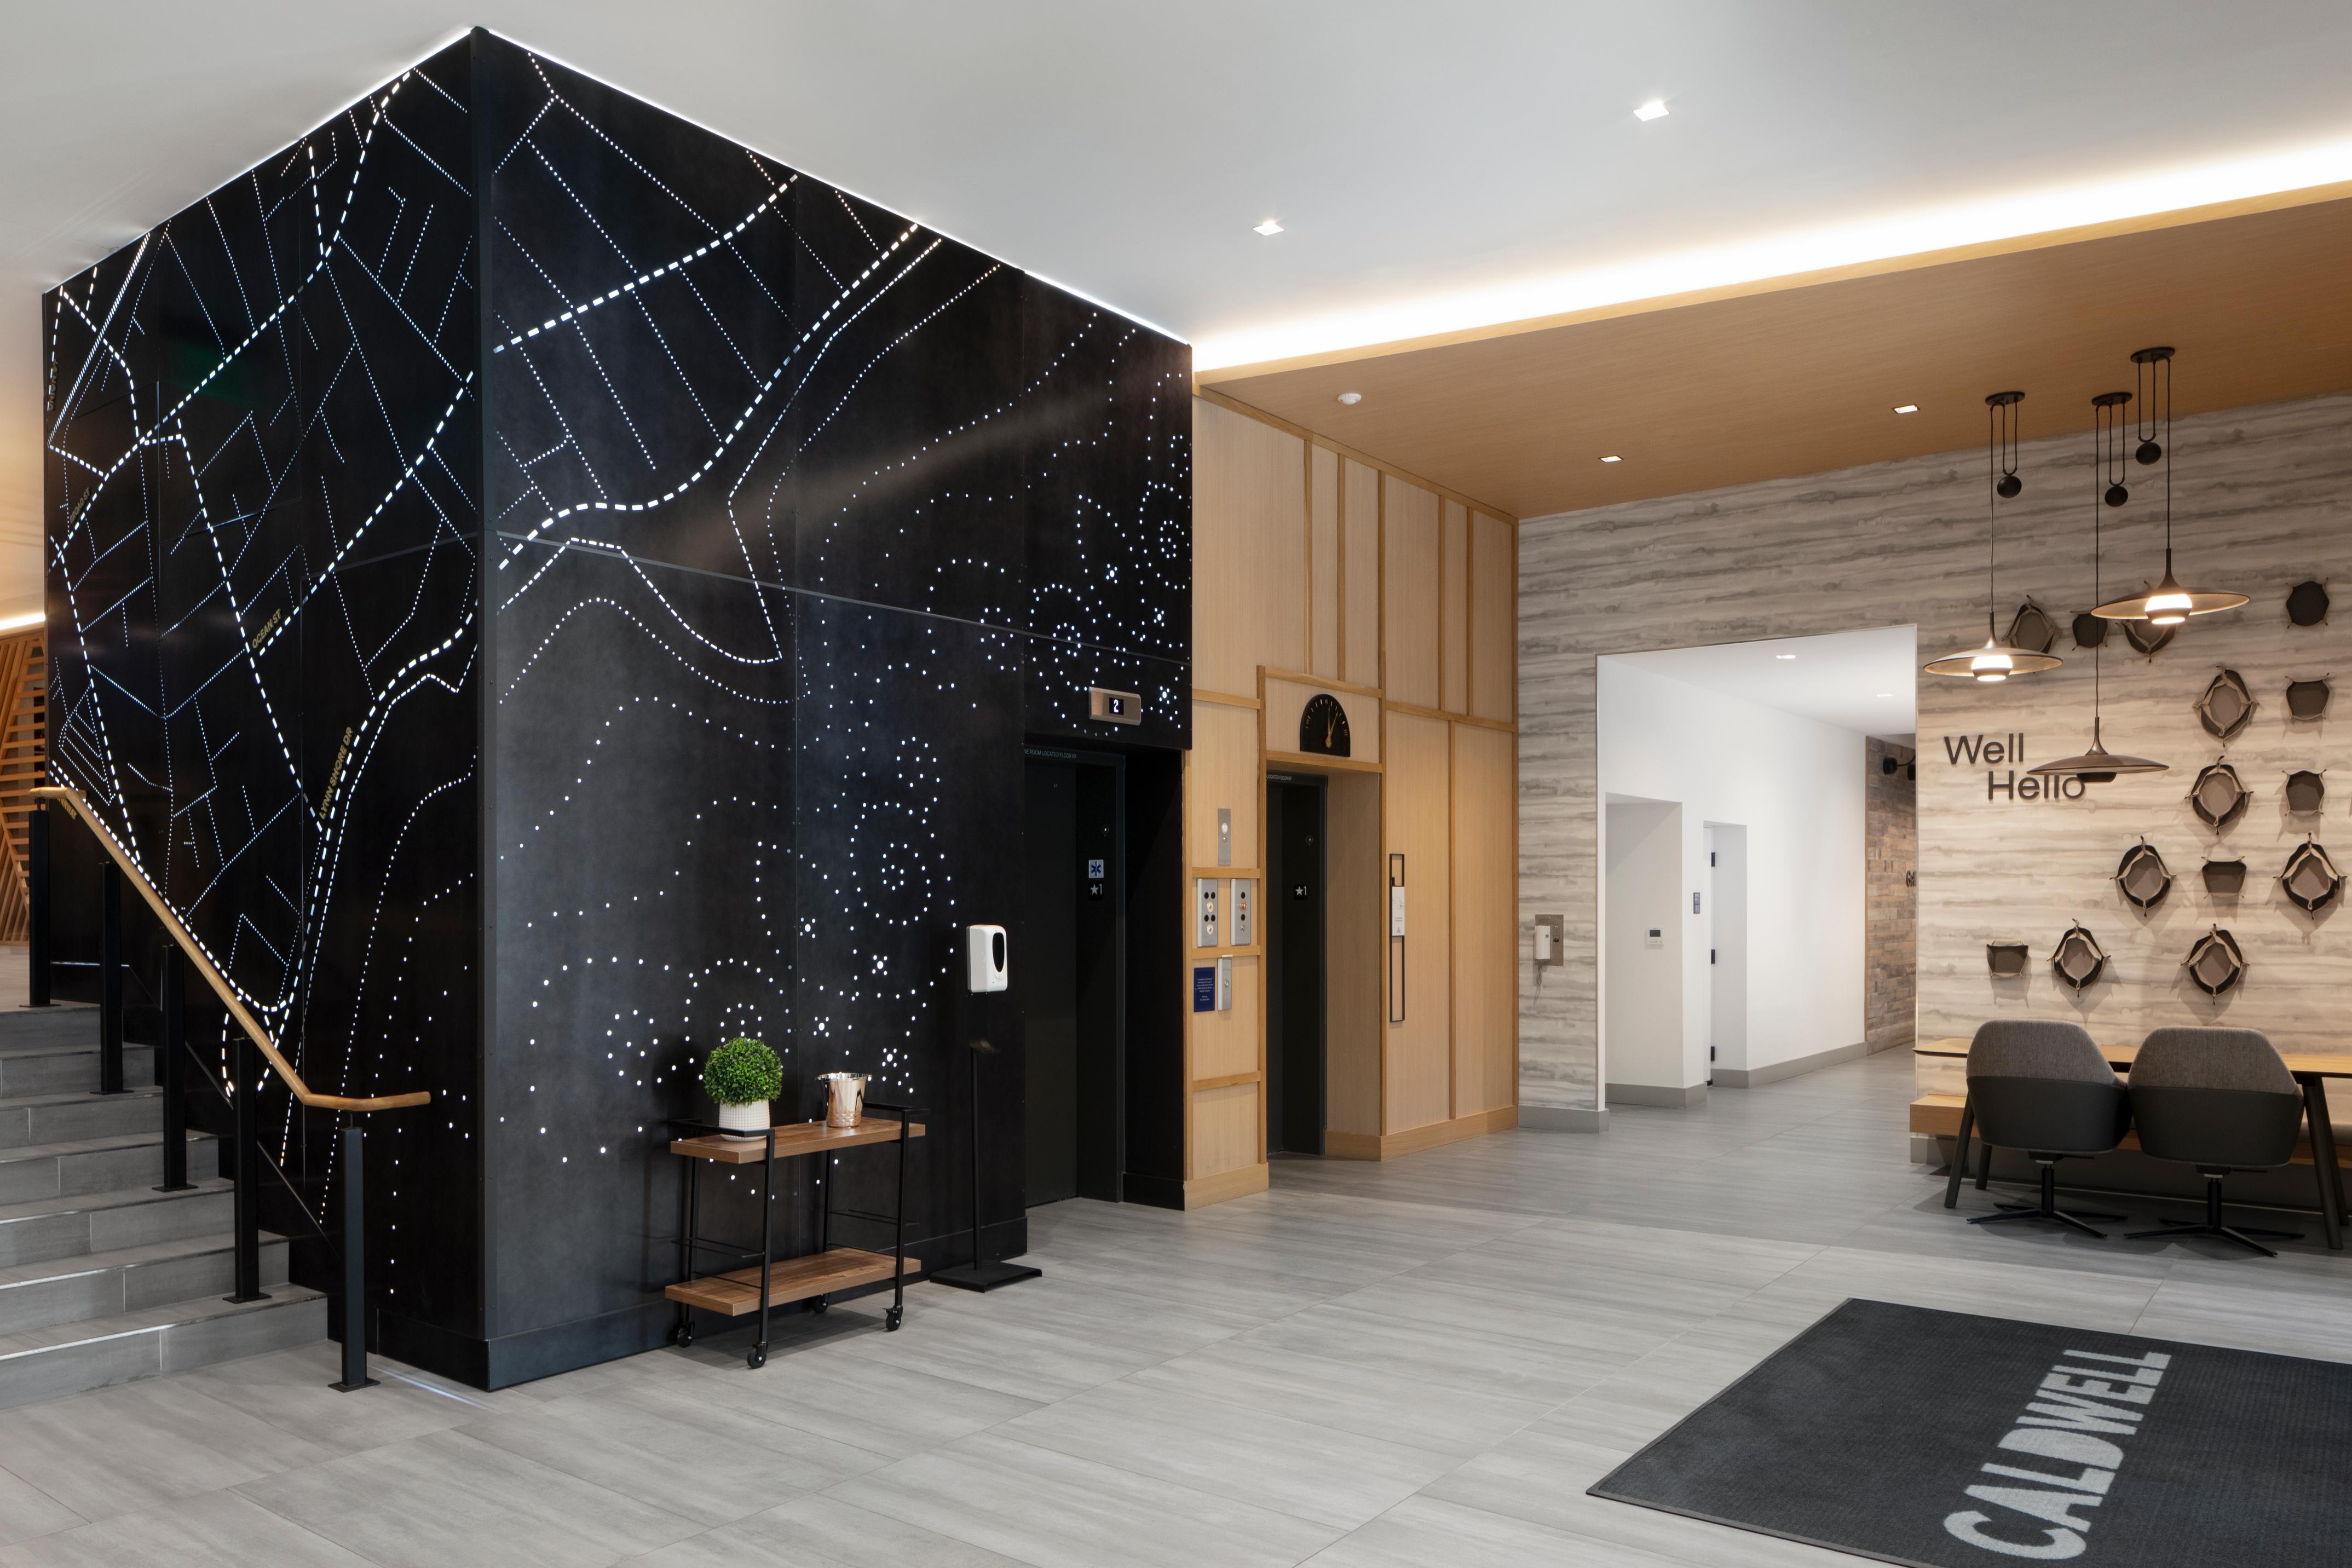 Elevator lobby with map mural on wall